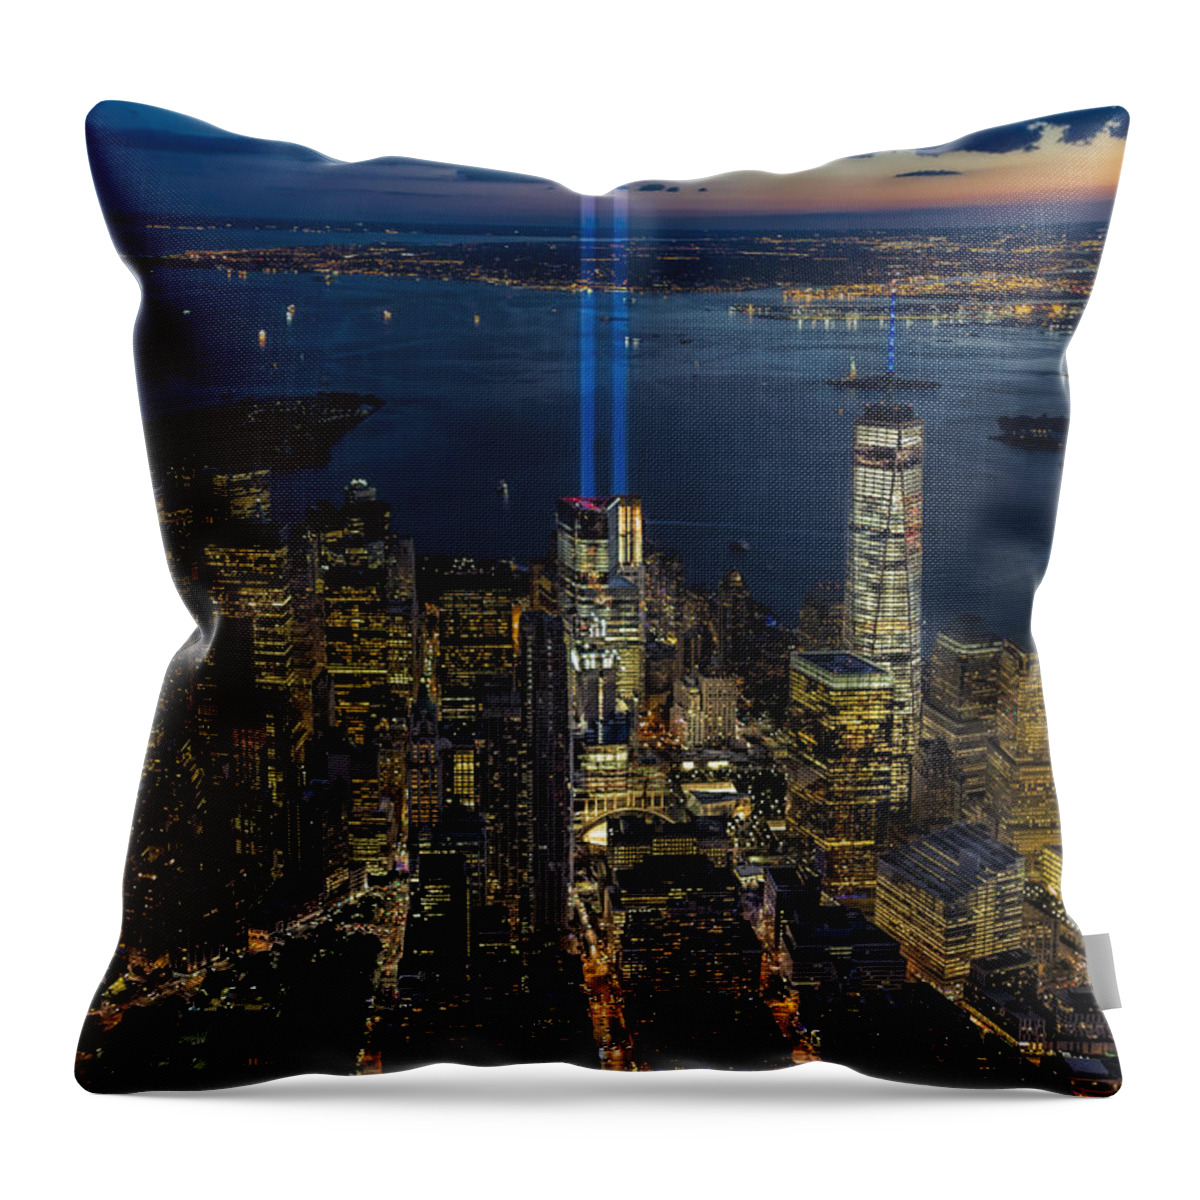 911 Memorial Throw Pillow featuring the photograph NYC 911 Tribute In Lights by Susan Candelario